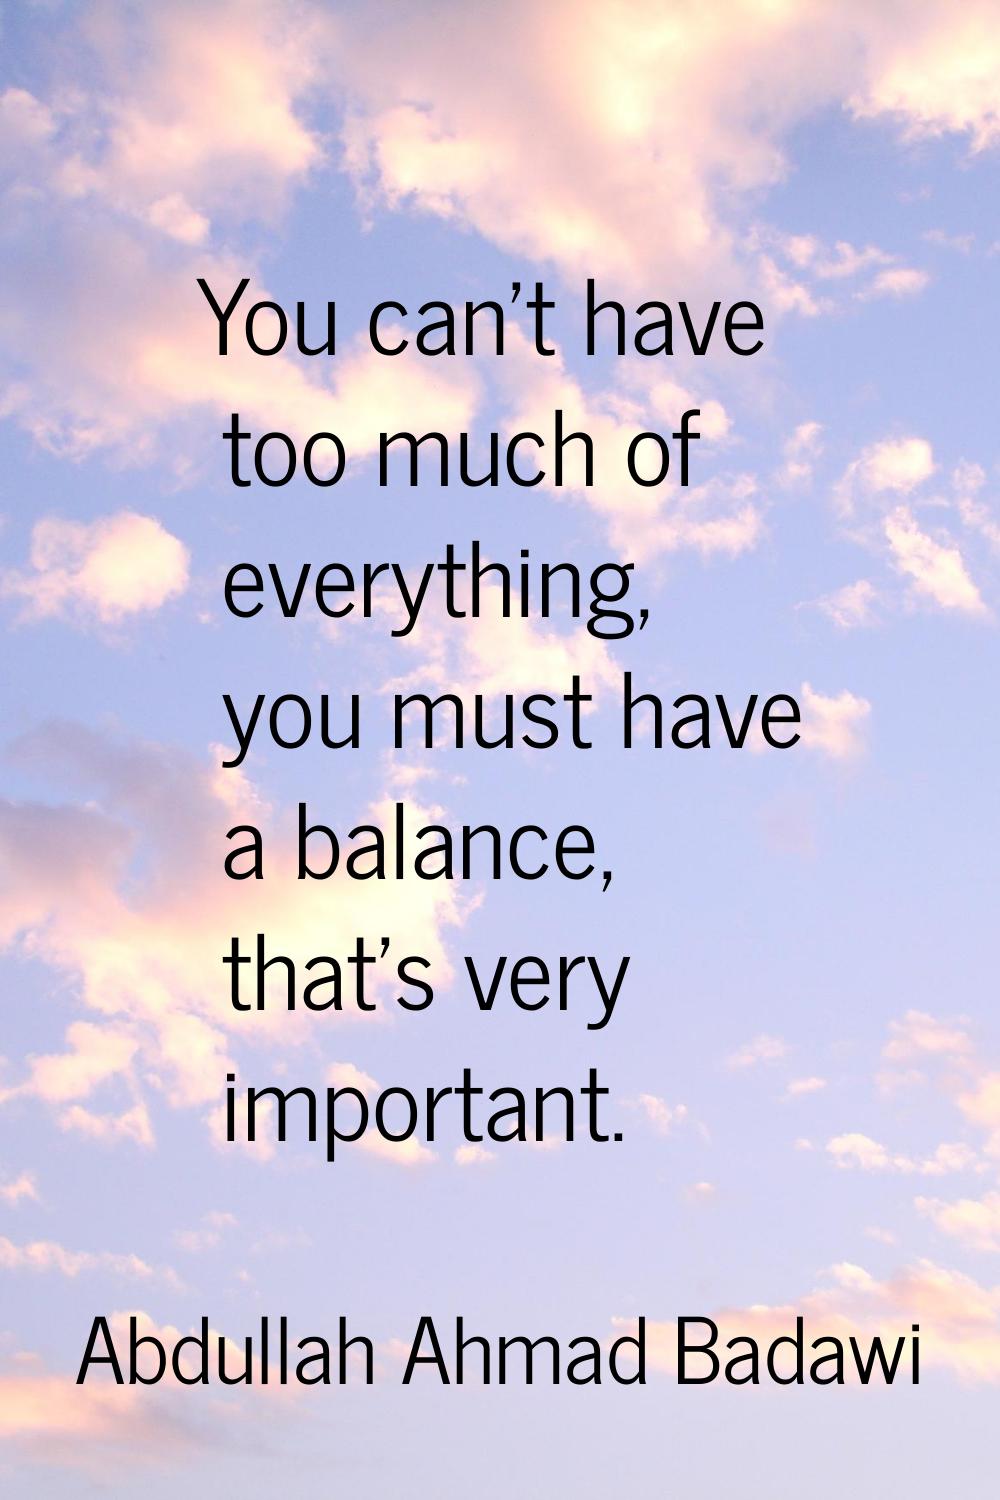 You can't have too much of everything, you must have a balance, that's very important.